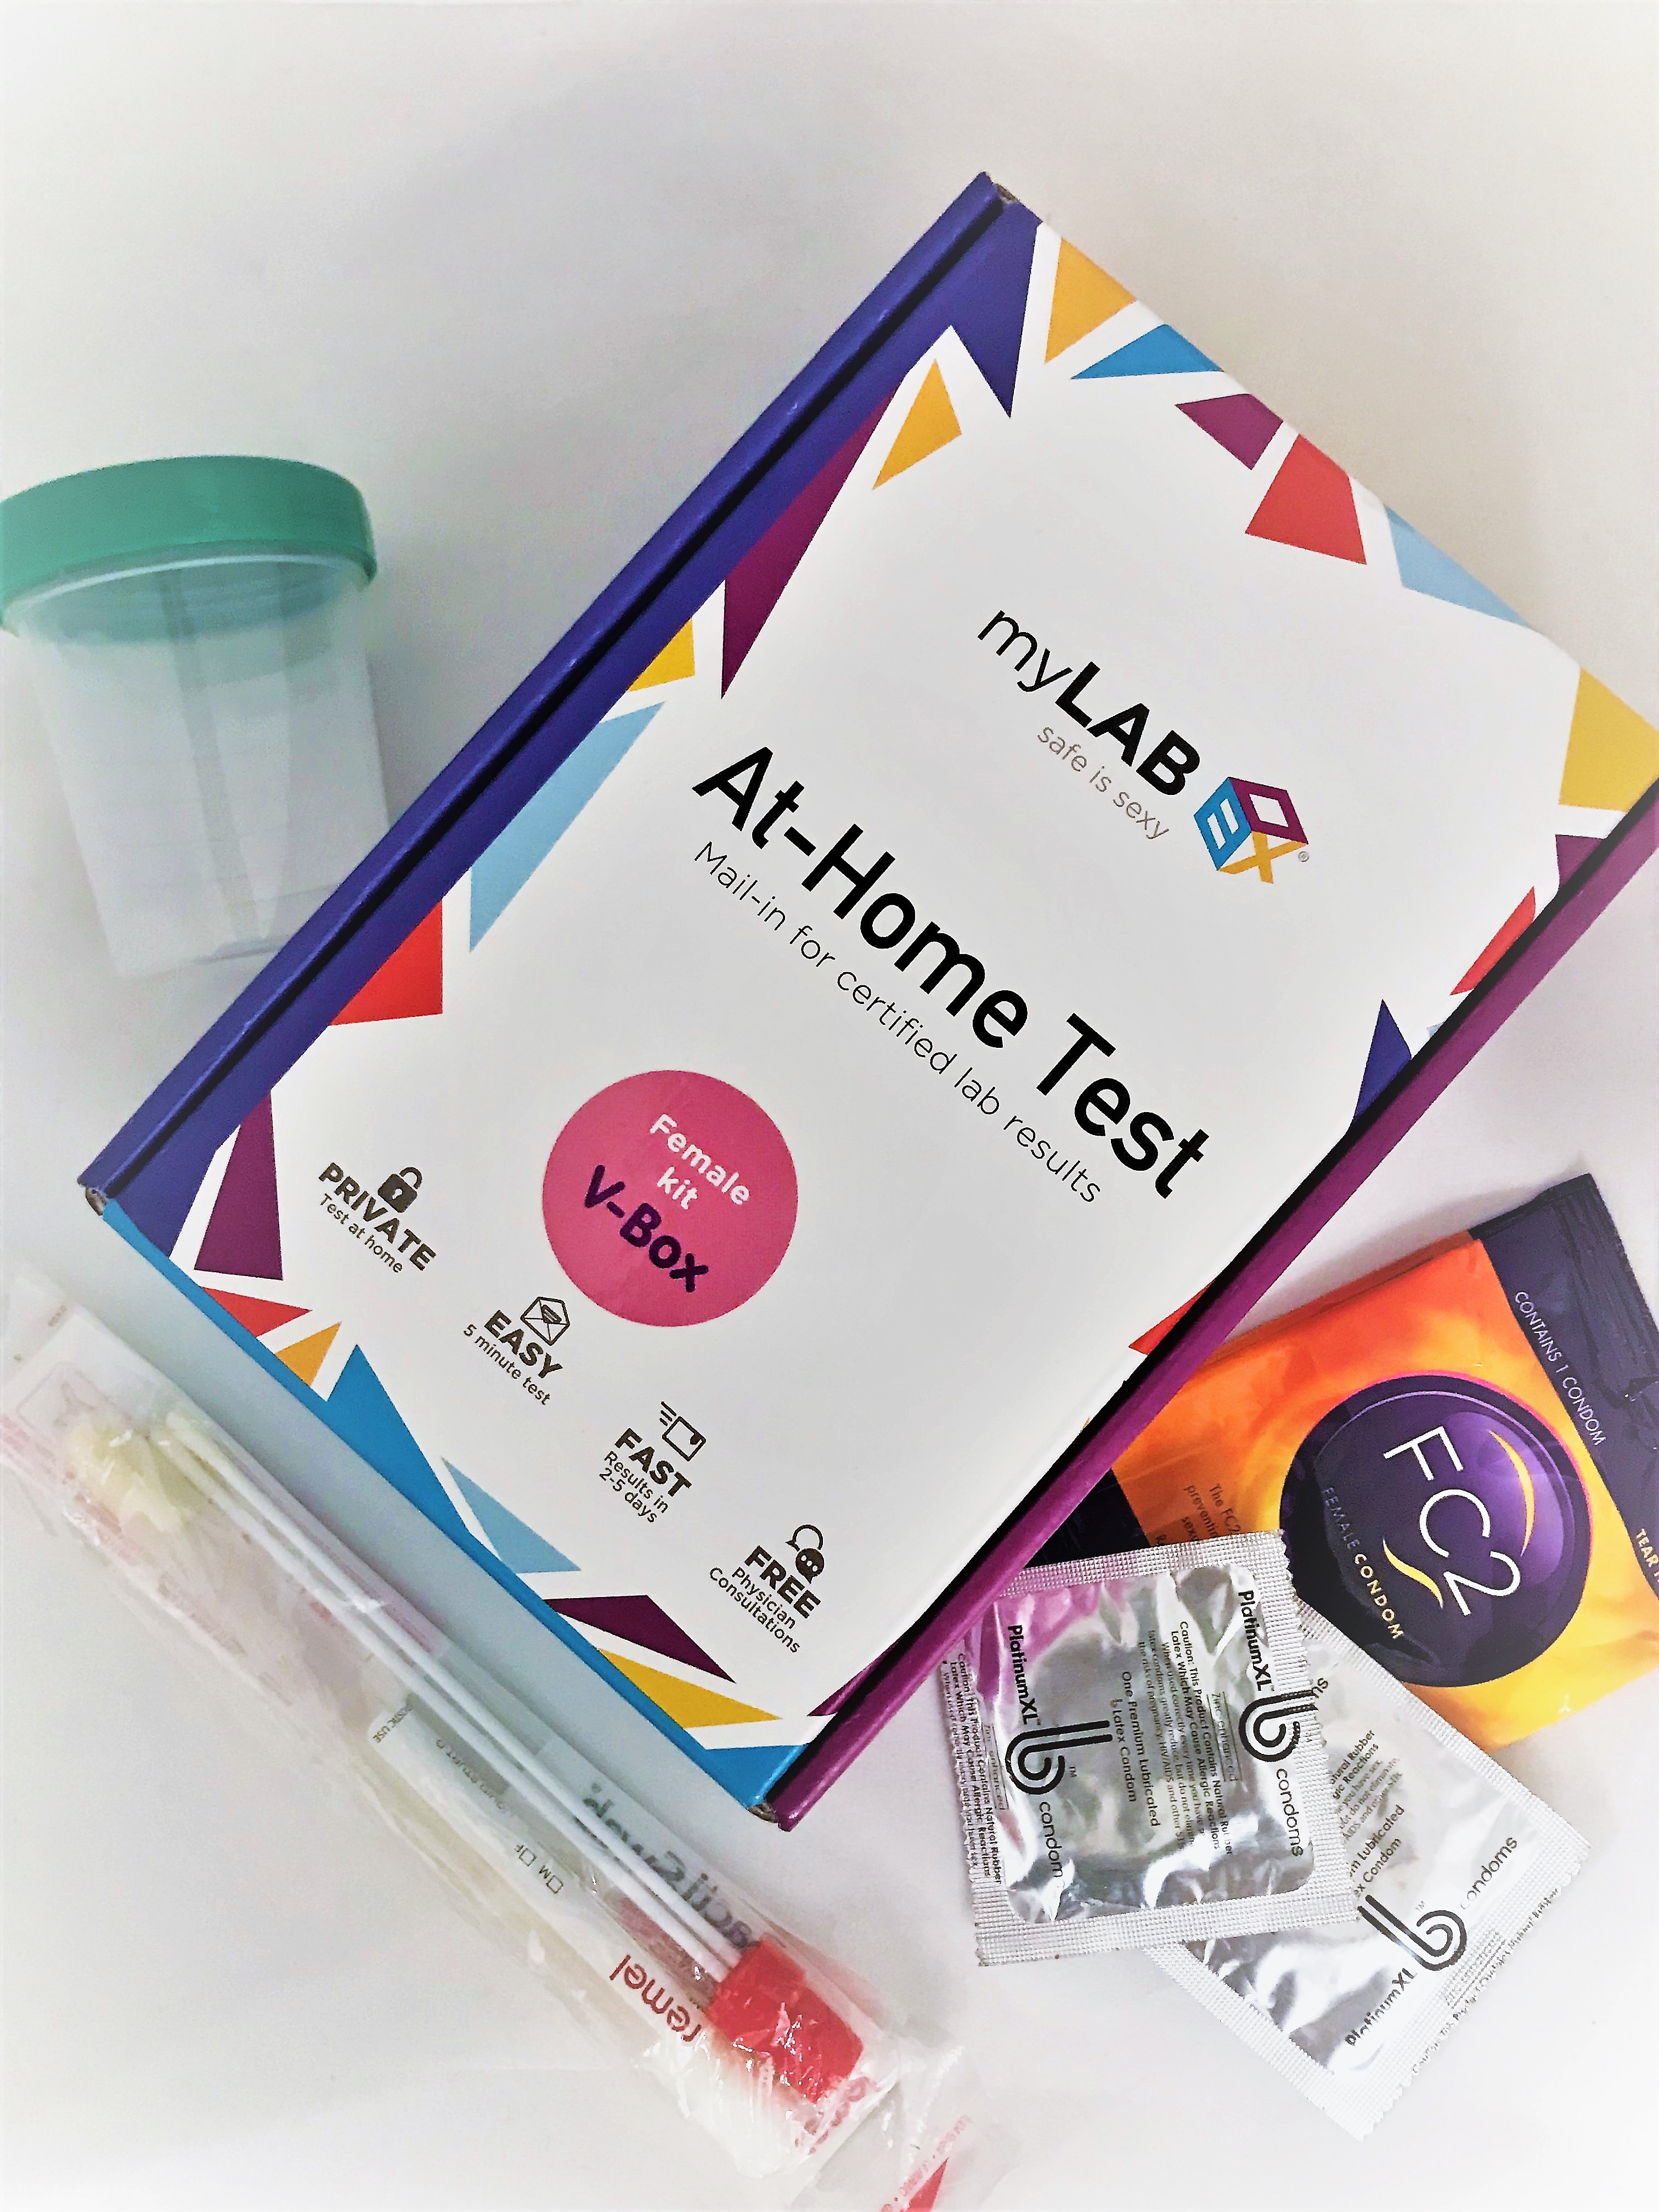 Weight Loss Test - At-home health & wellness testing - myLAB Box